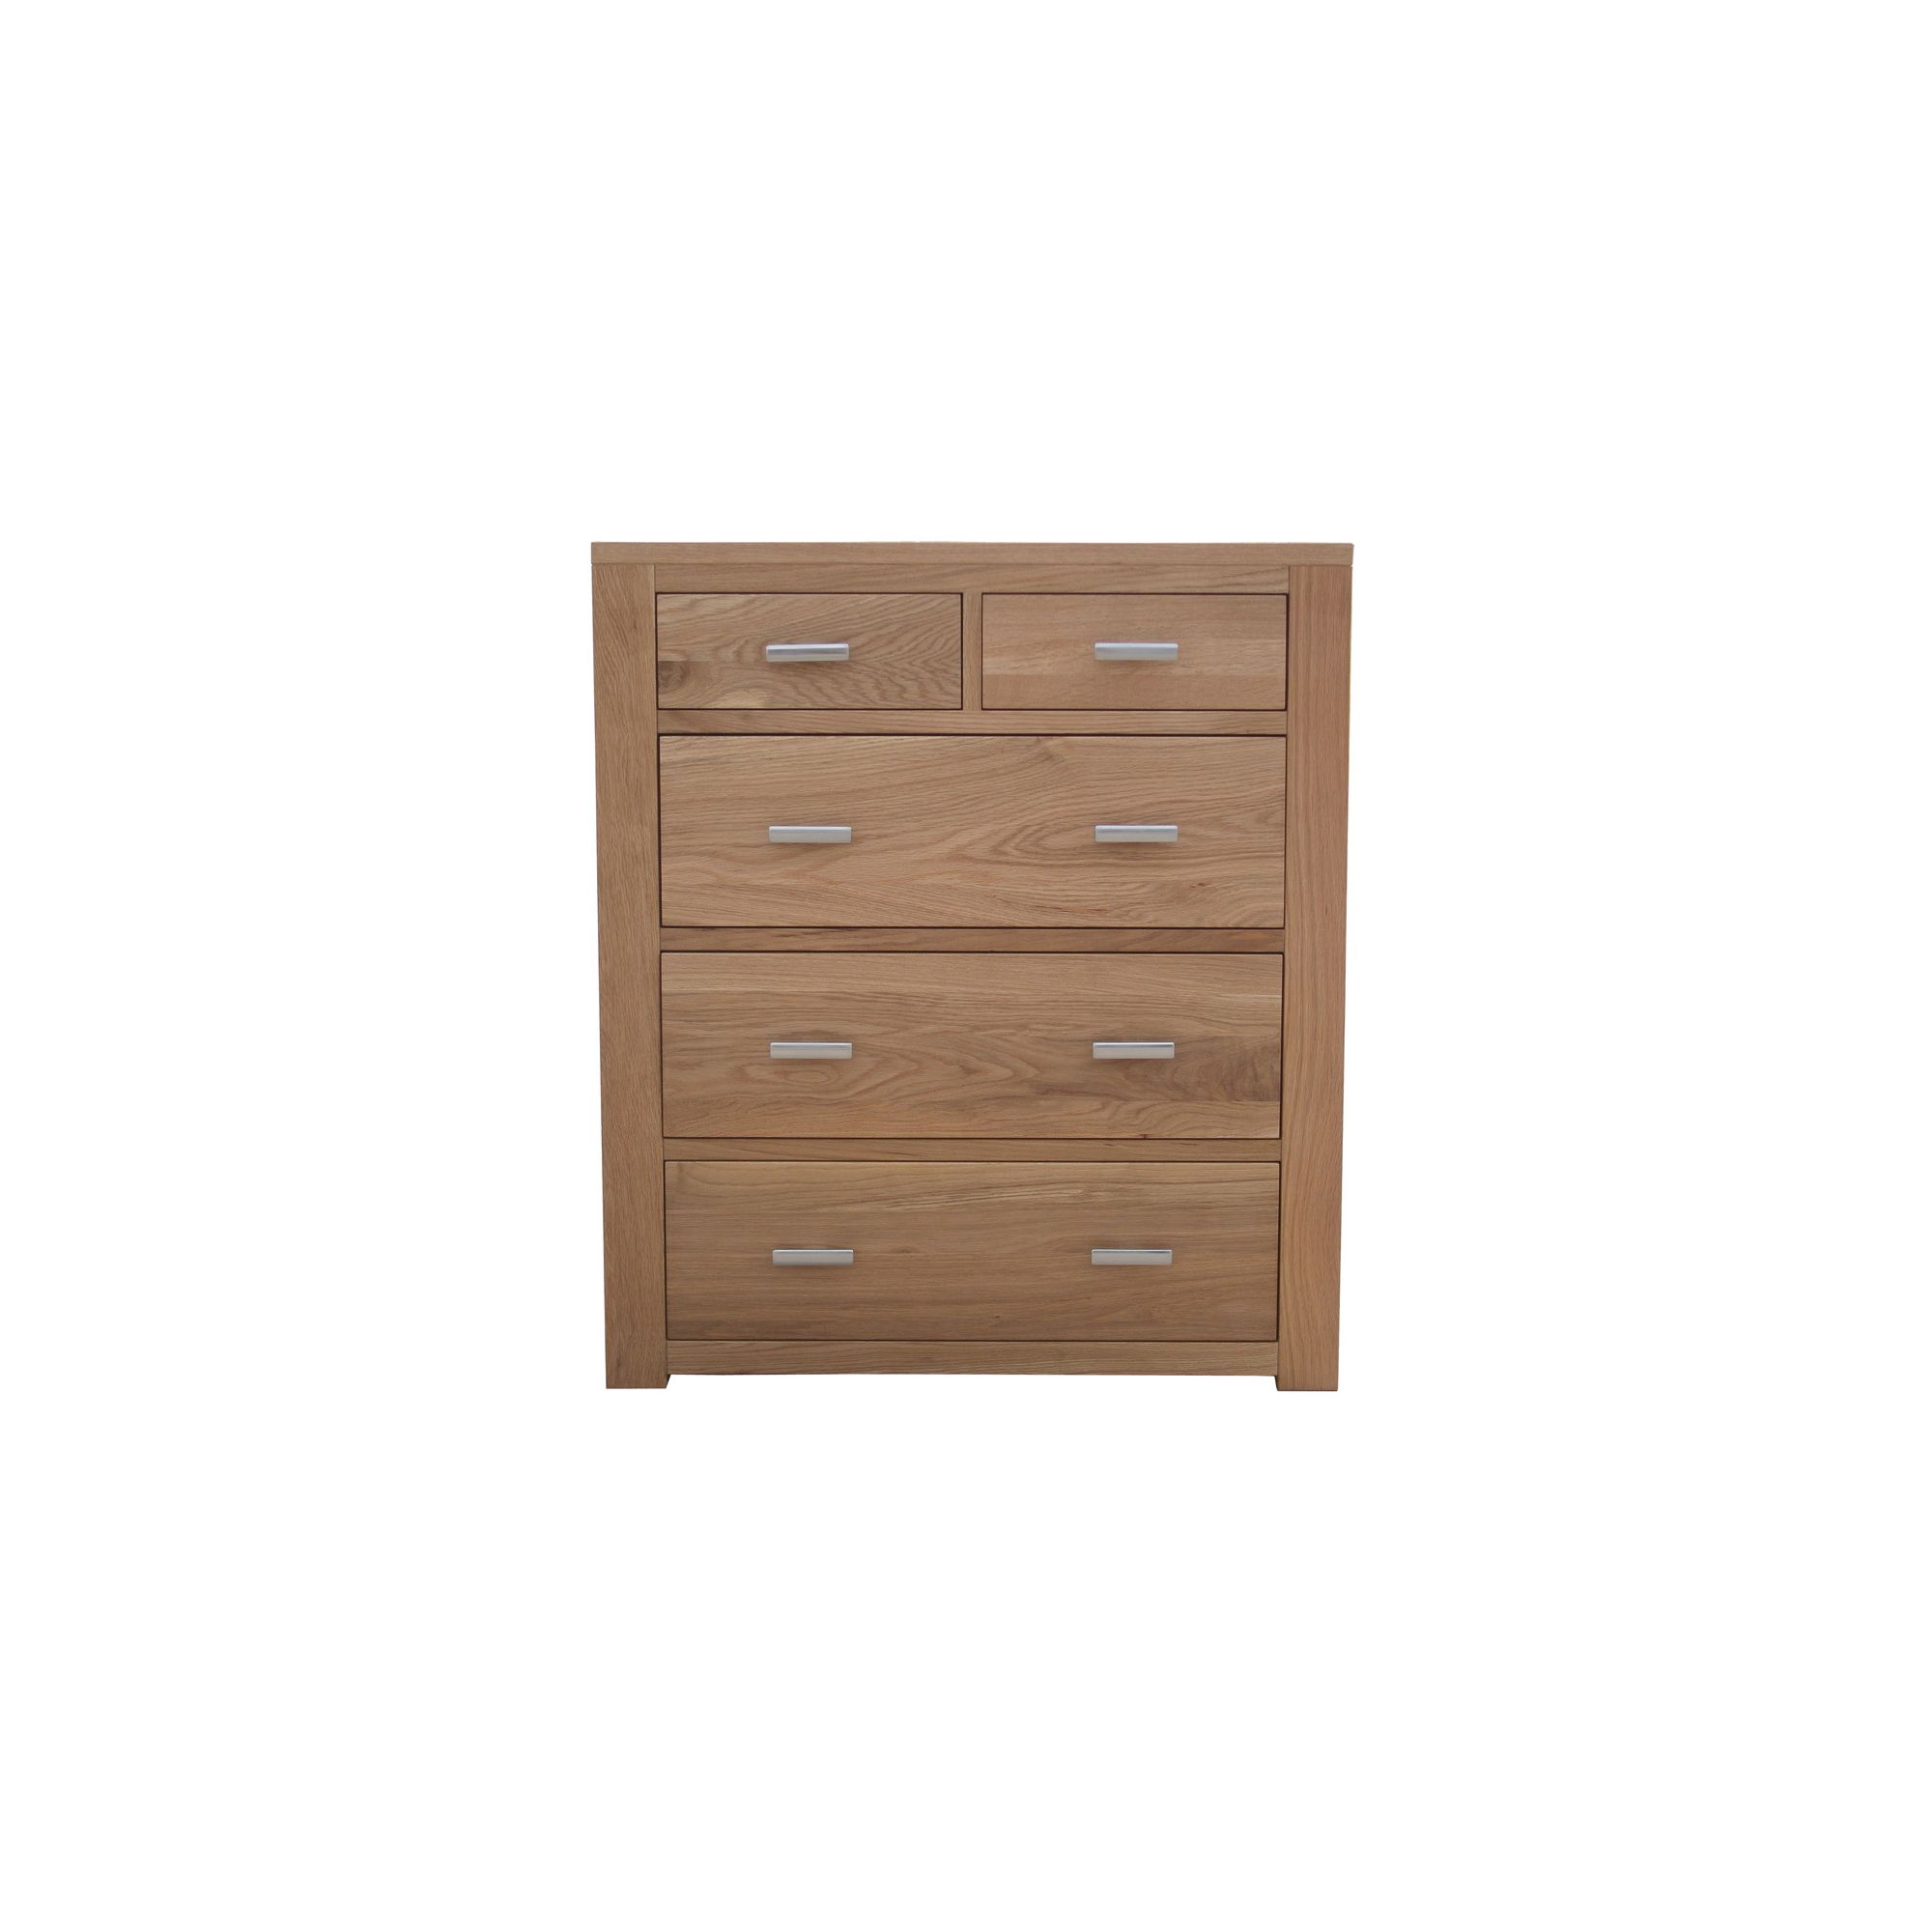 Home Zone Furniture Churchill Oak 2010 2 + 3 Chest of Drawers in Natural Oak at Tesco Direct